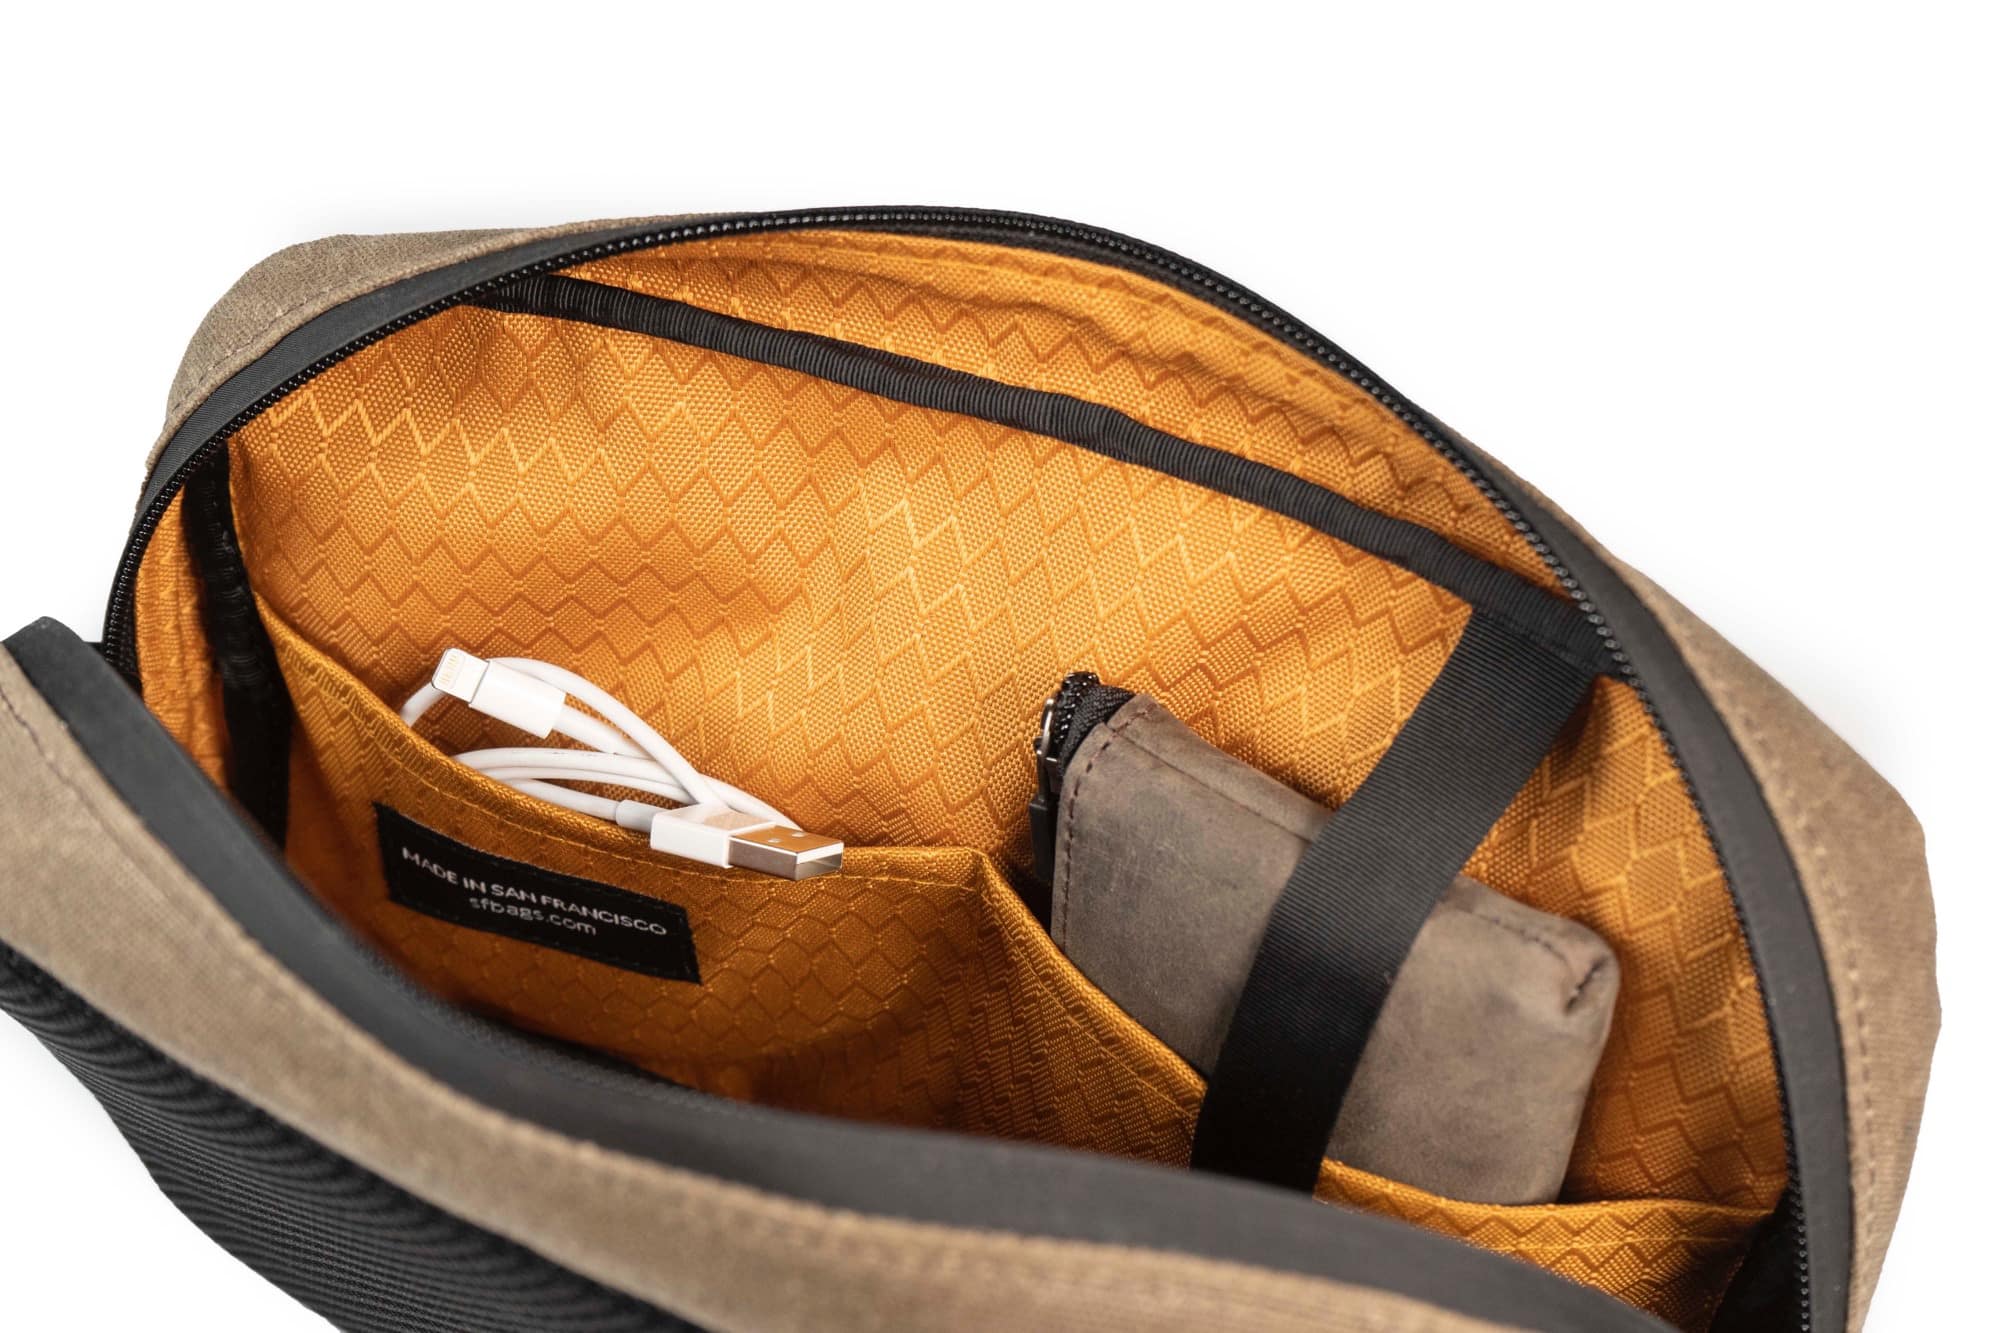 I dare you to lose something inside the Sutter Sling Pouch. I double-dare you.